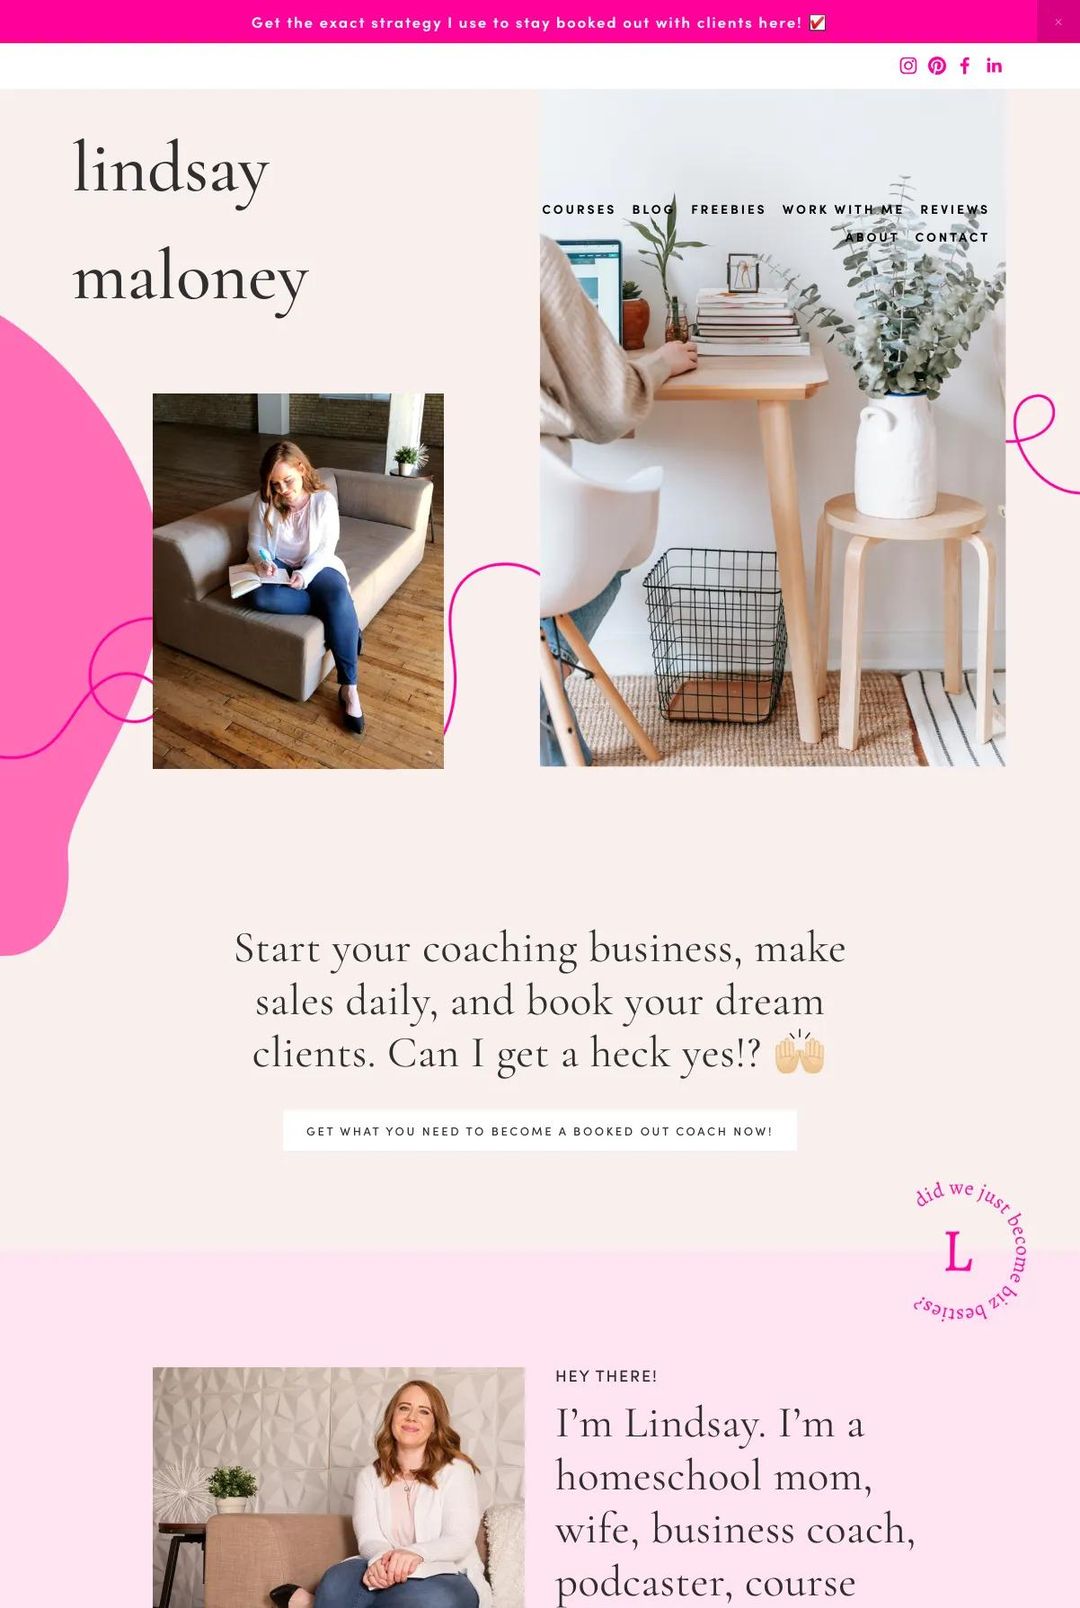 Screenshot 1 of Lindsay Maloney (Example Squarespace Coach Website)